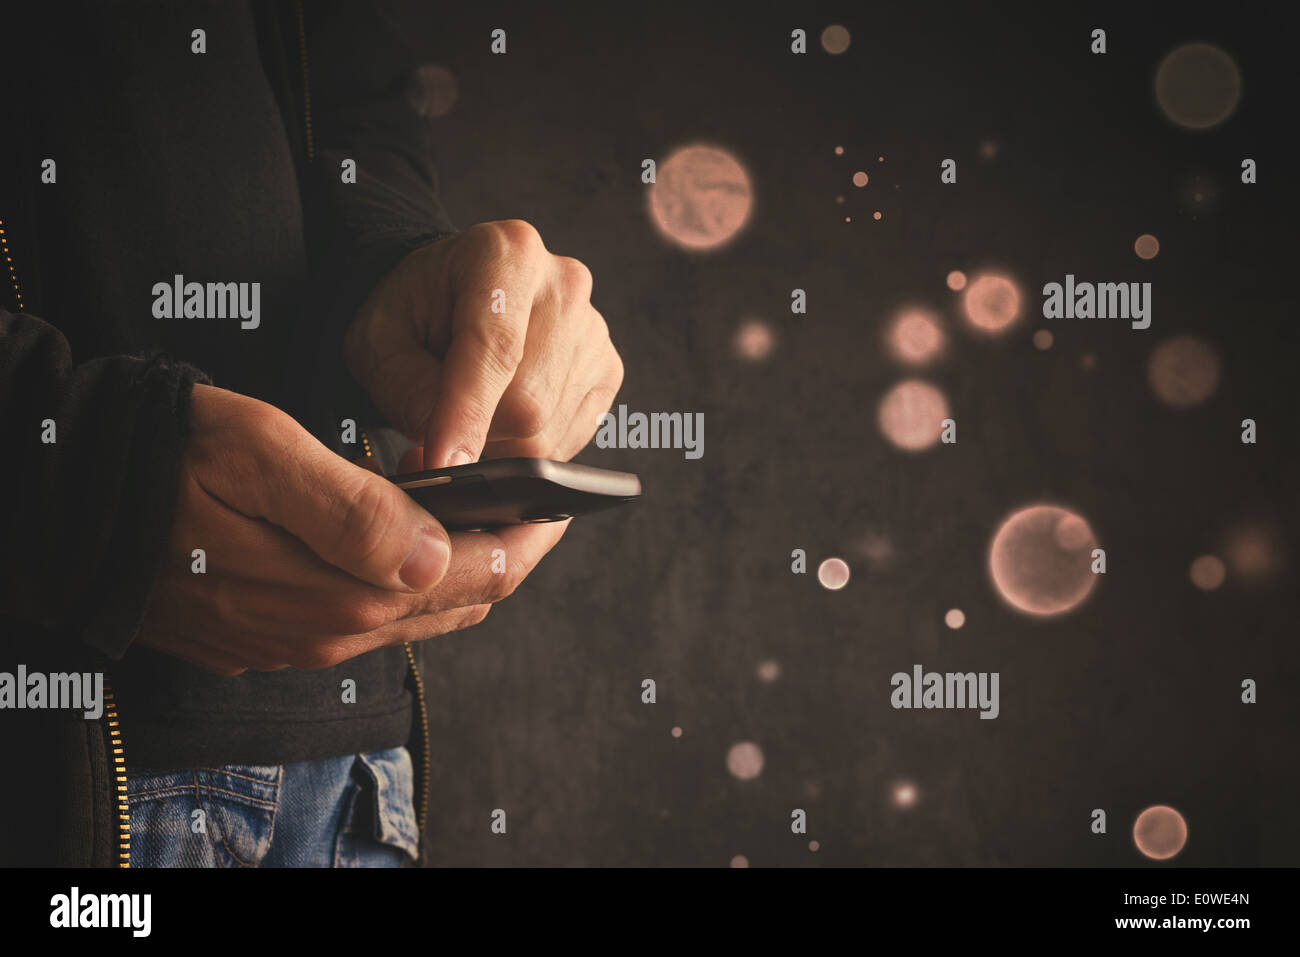 Hands hold mobile smart phone device. Stock Photo